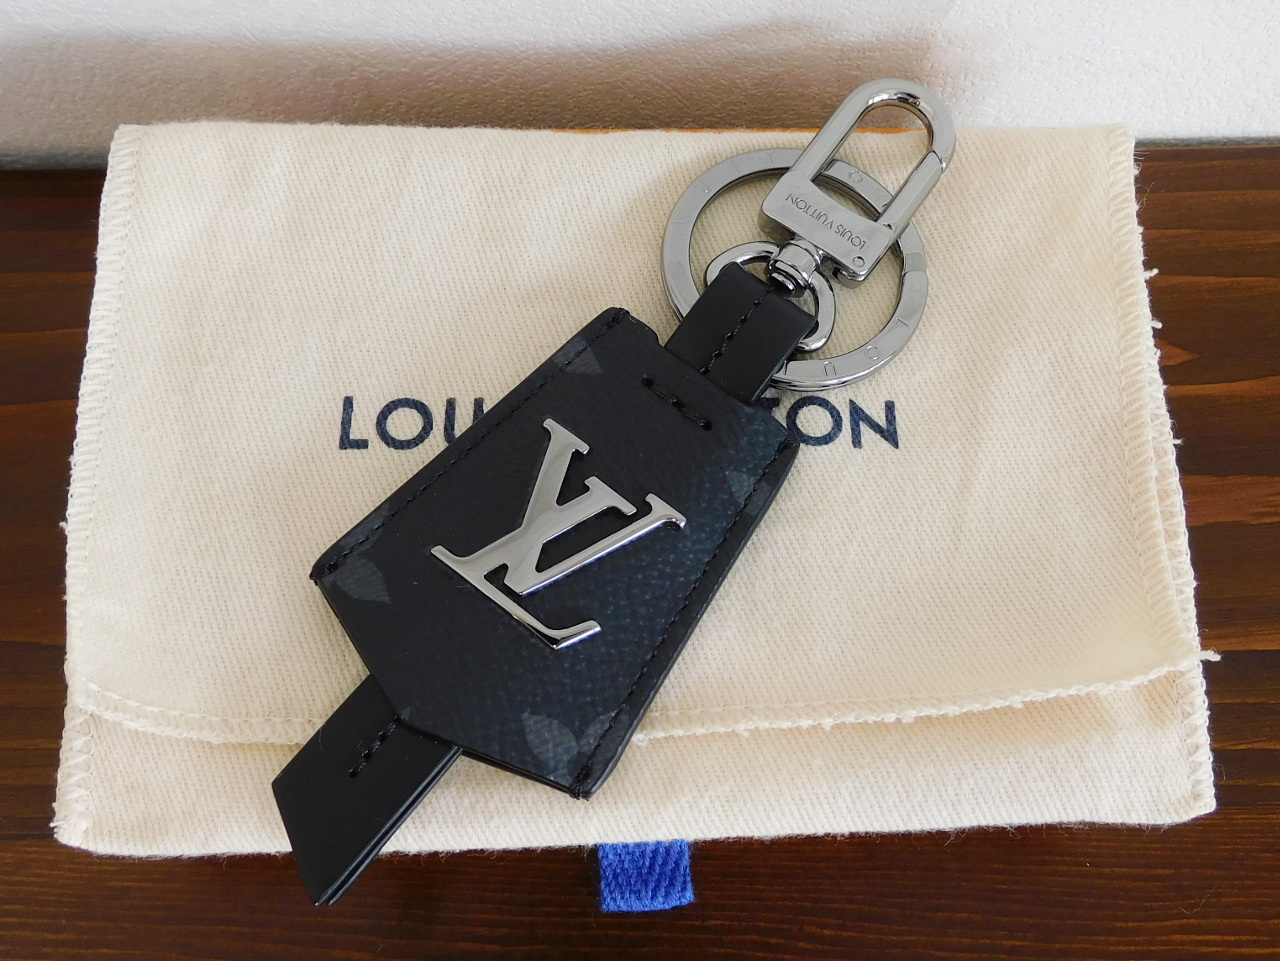 Louis Vuitton MONOGRAM Lv cloches-cles bag charm and key holder (M63620)